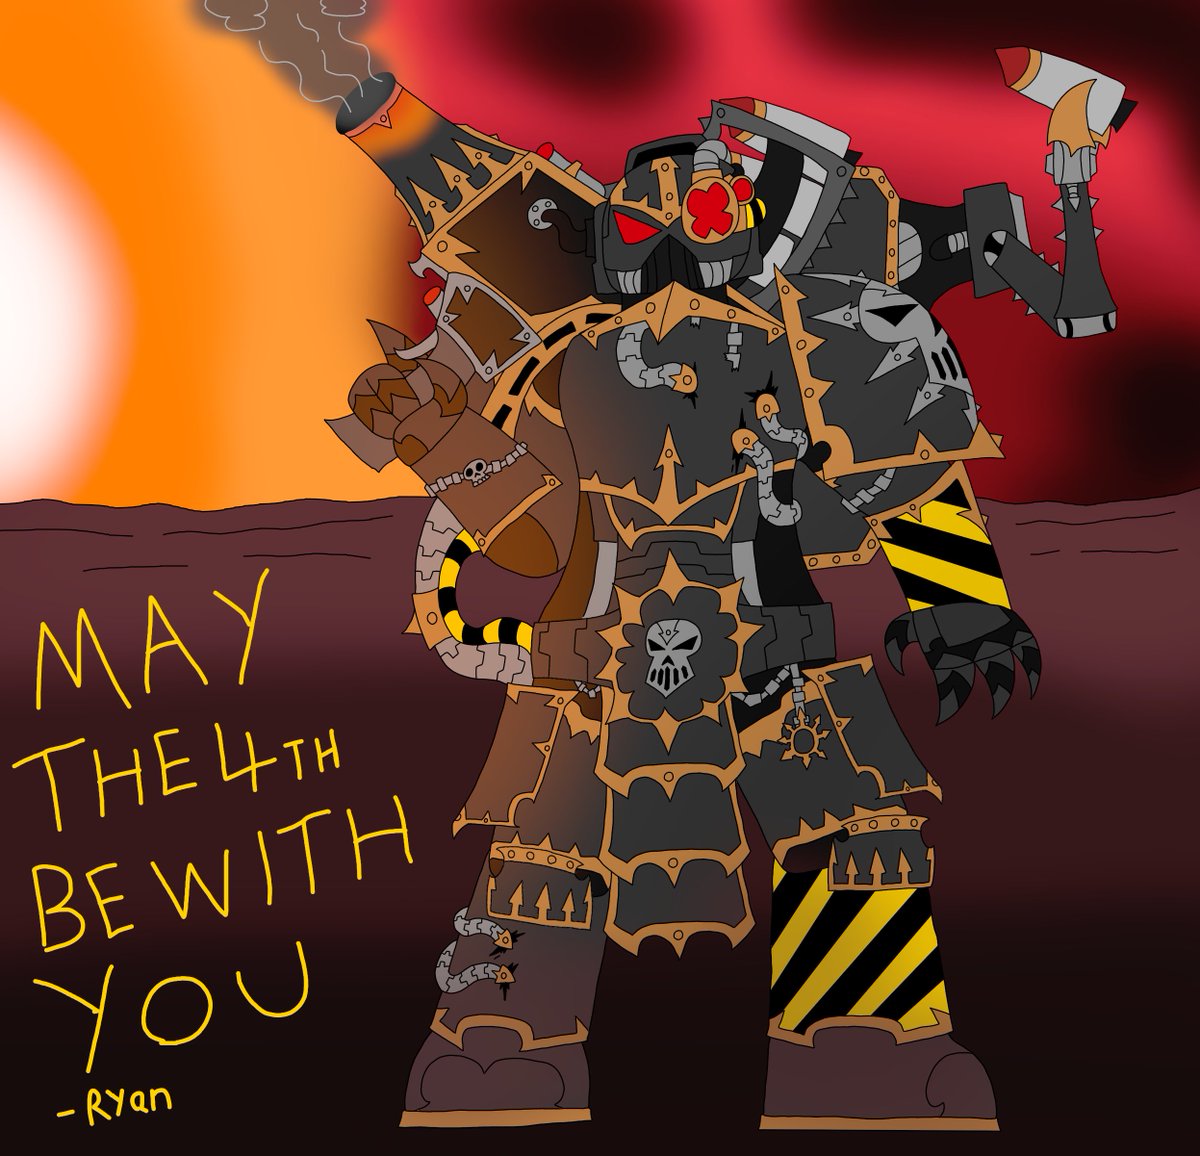 May the 4th be with you.... 
#WarhammerCommunity #Warhammer40k #WarhammerArt #Warhammer4000 #art